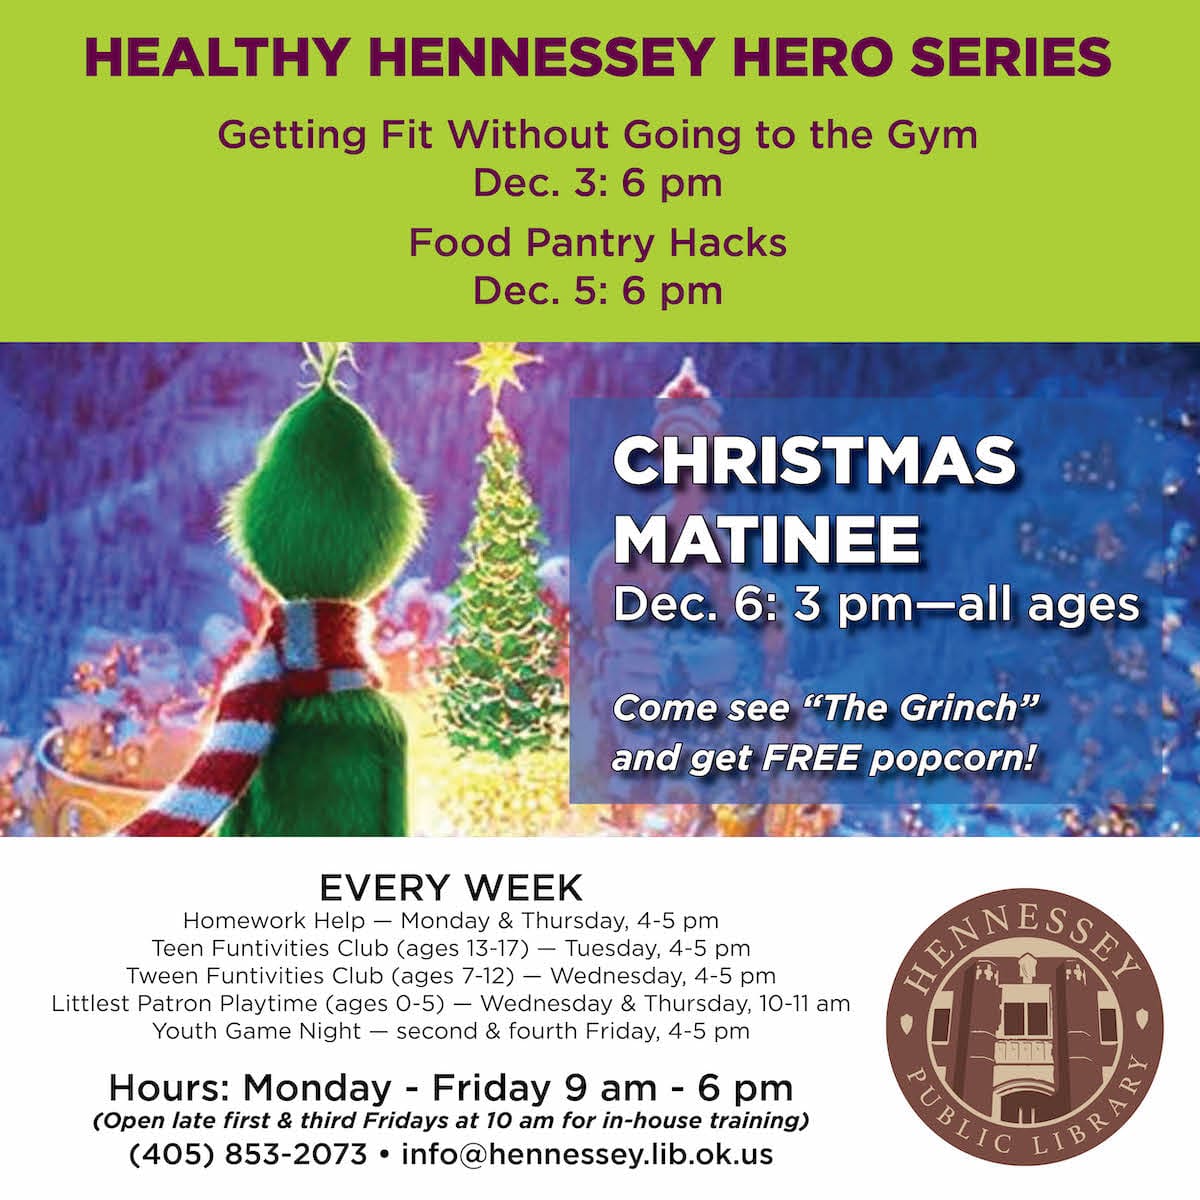 CHRISTMAS MATINEE AT THE HENNESSEY LIBRARY